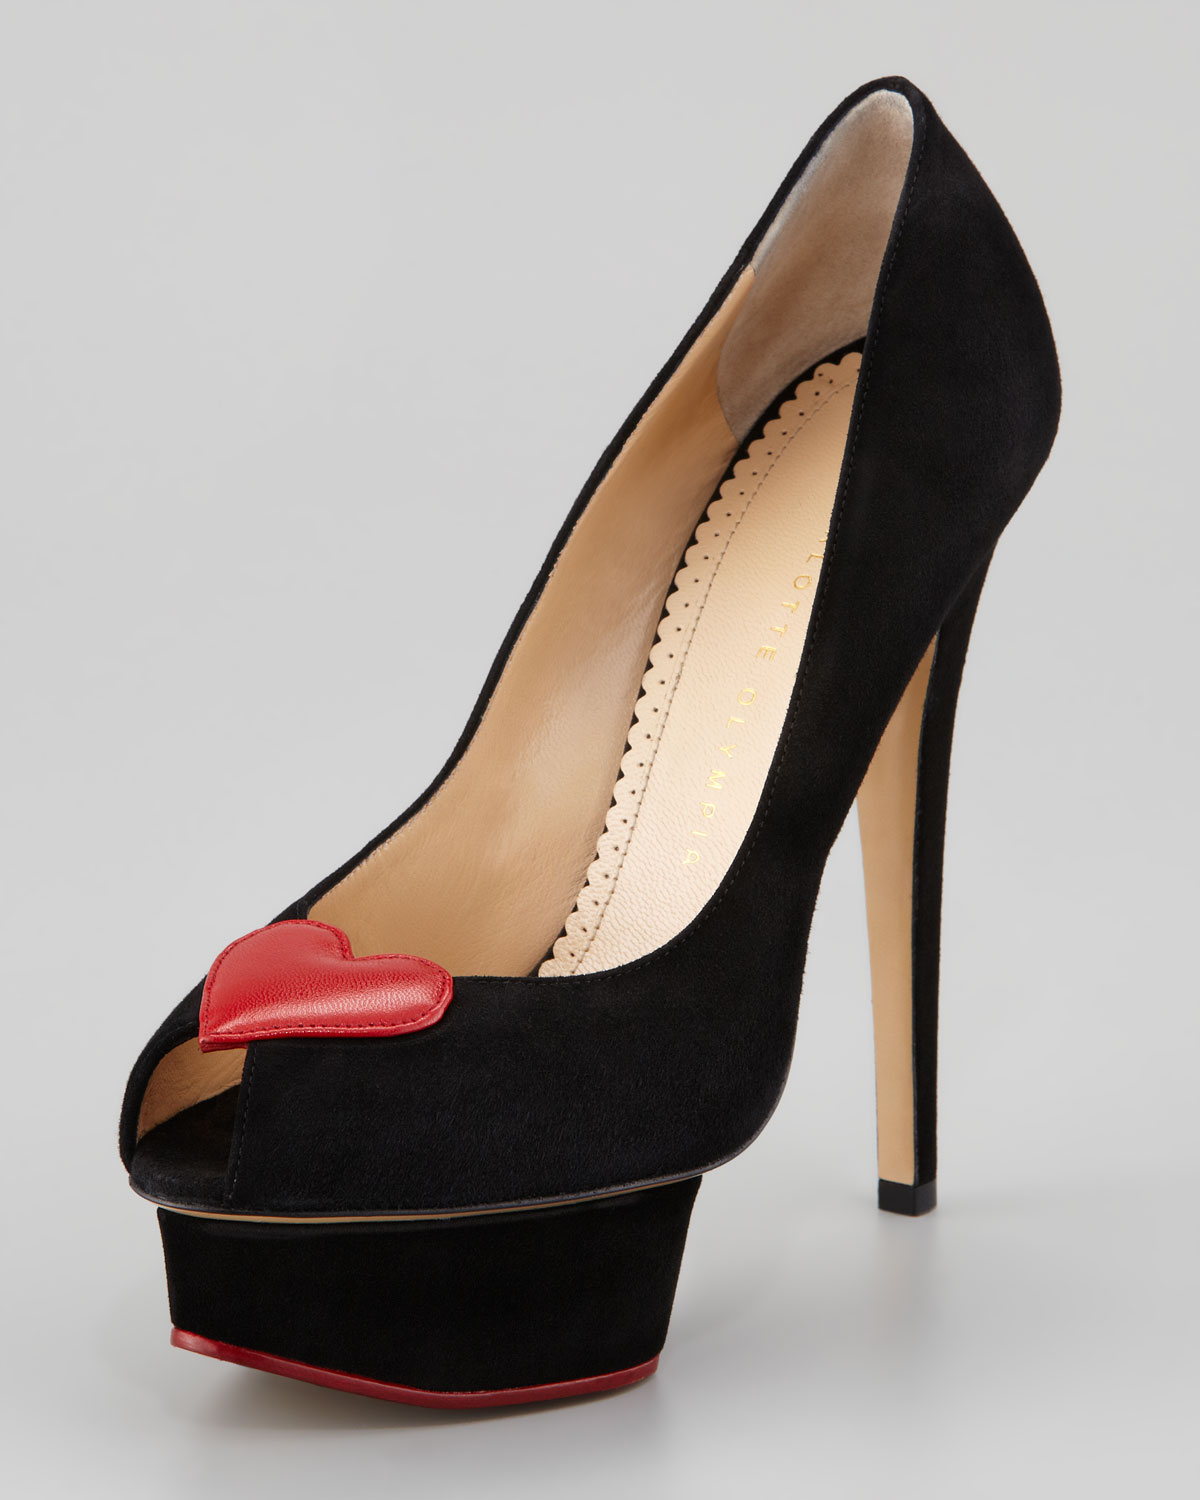 Lyst - Charlotte Olympia Catherine Suede Pumps in Black